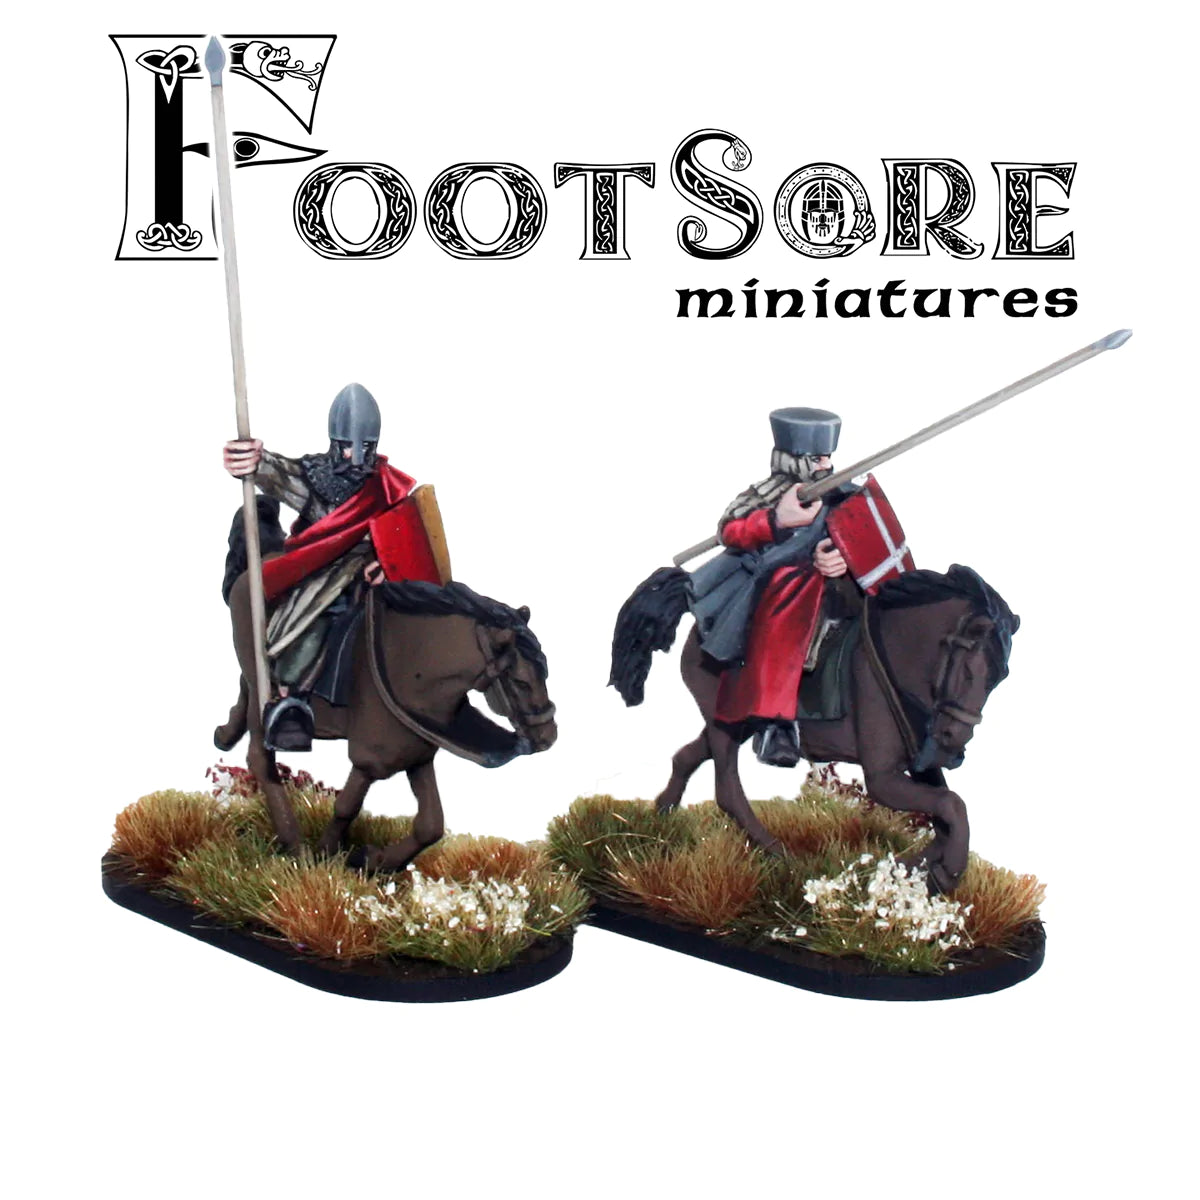 Welsh Medieval Cavalry with Lances: Footsore Miniatures